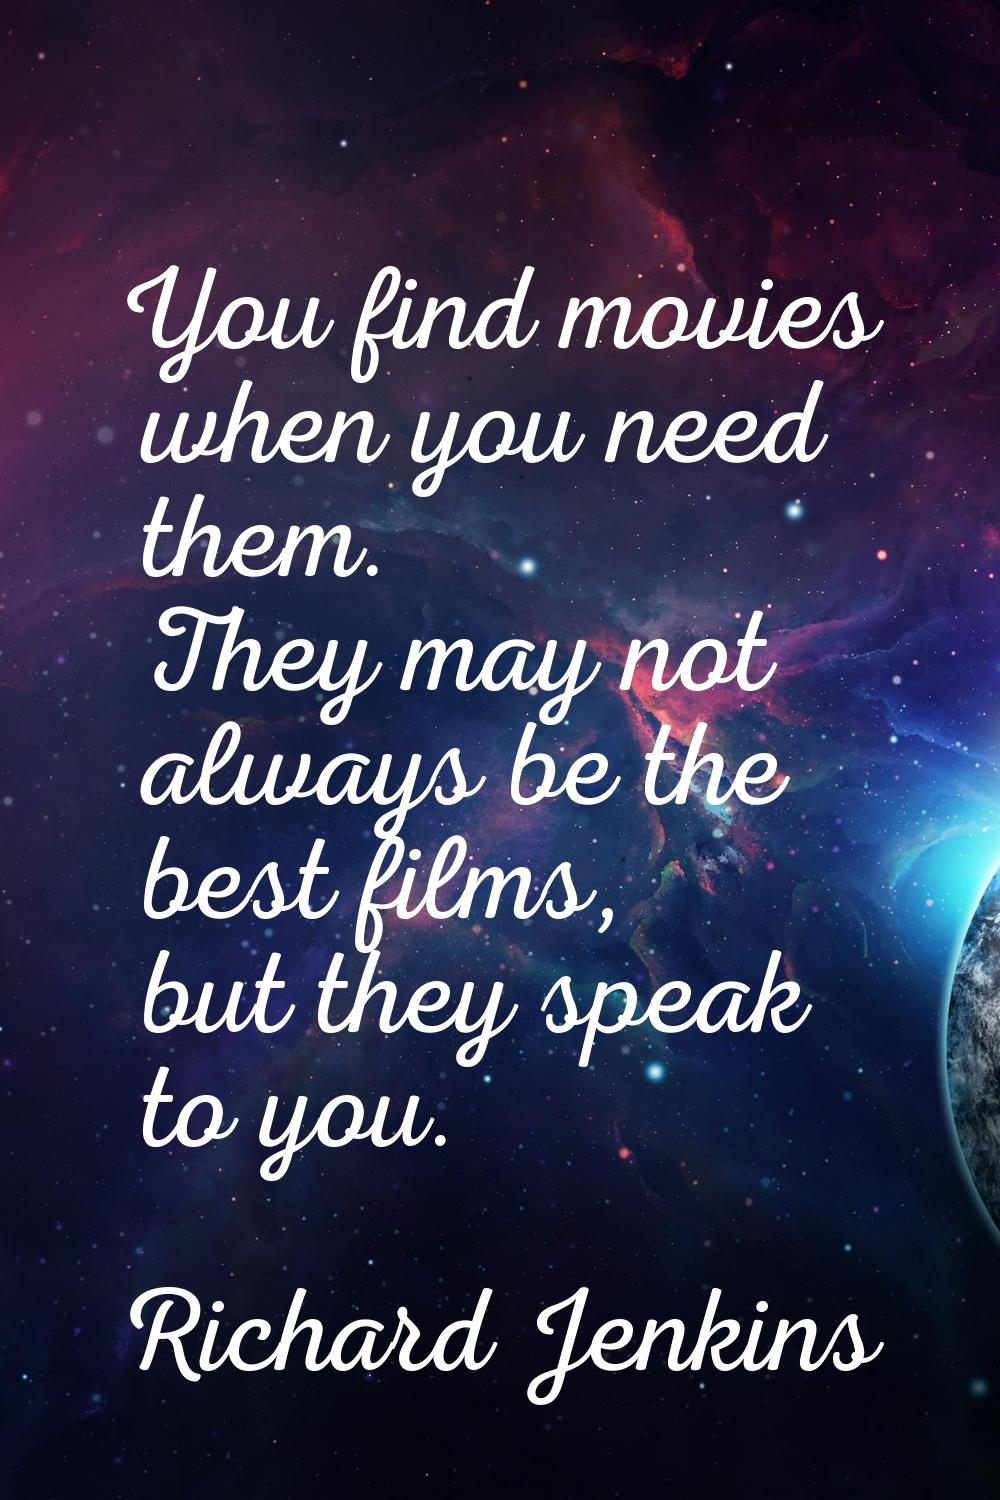 You find movies when you need them. They may not always be the best films, but they speak to you.